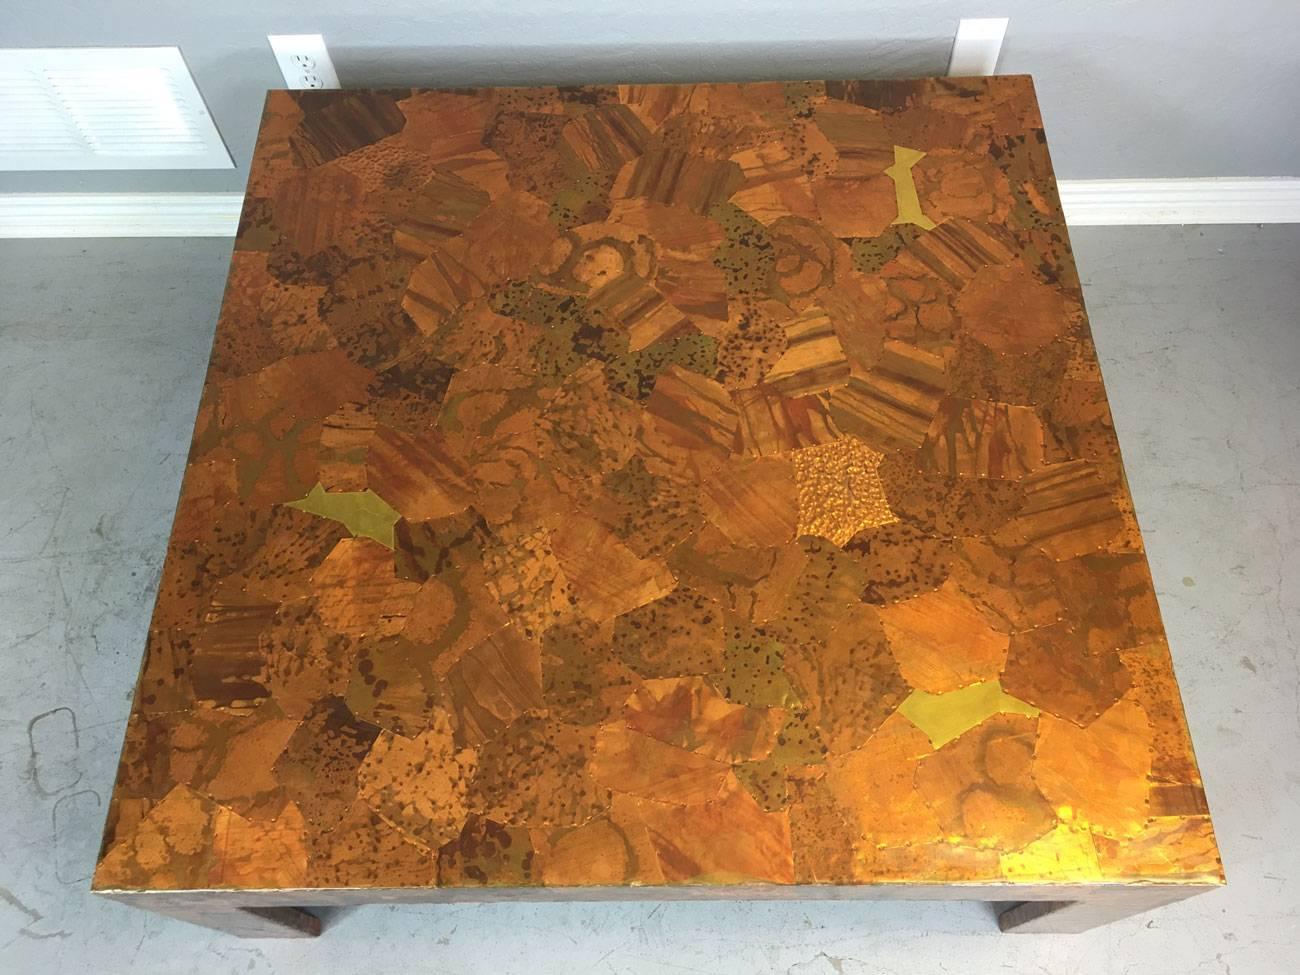 Percival Lafer hand-hammered copper and bronze coffee table. Made in Brazil, circa 1960s. 

Condition: Excellent with minor life wear.